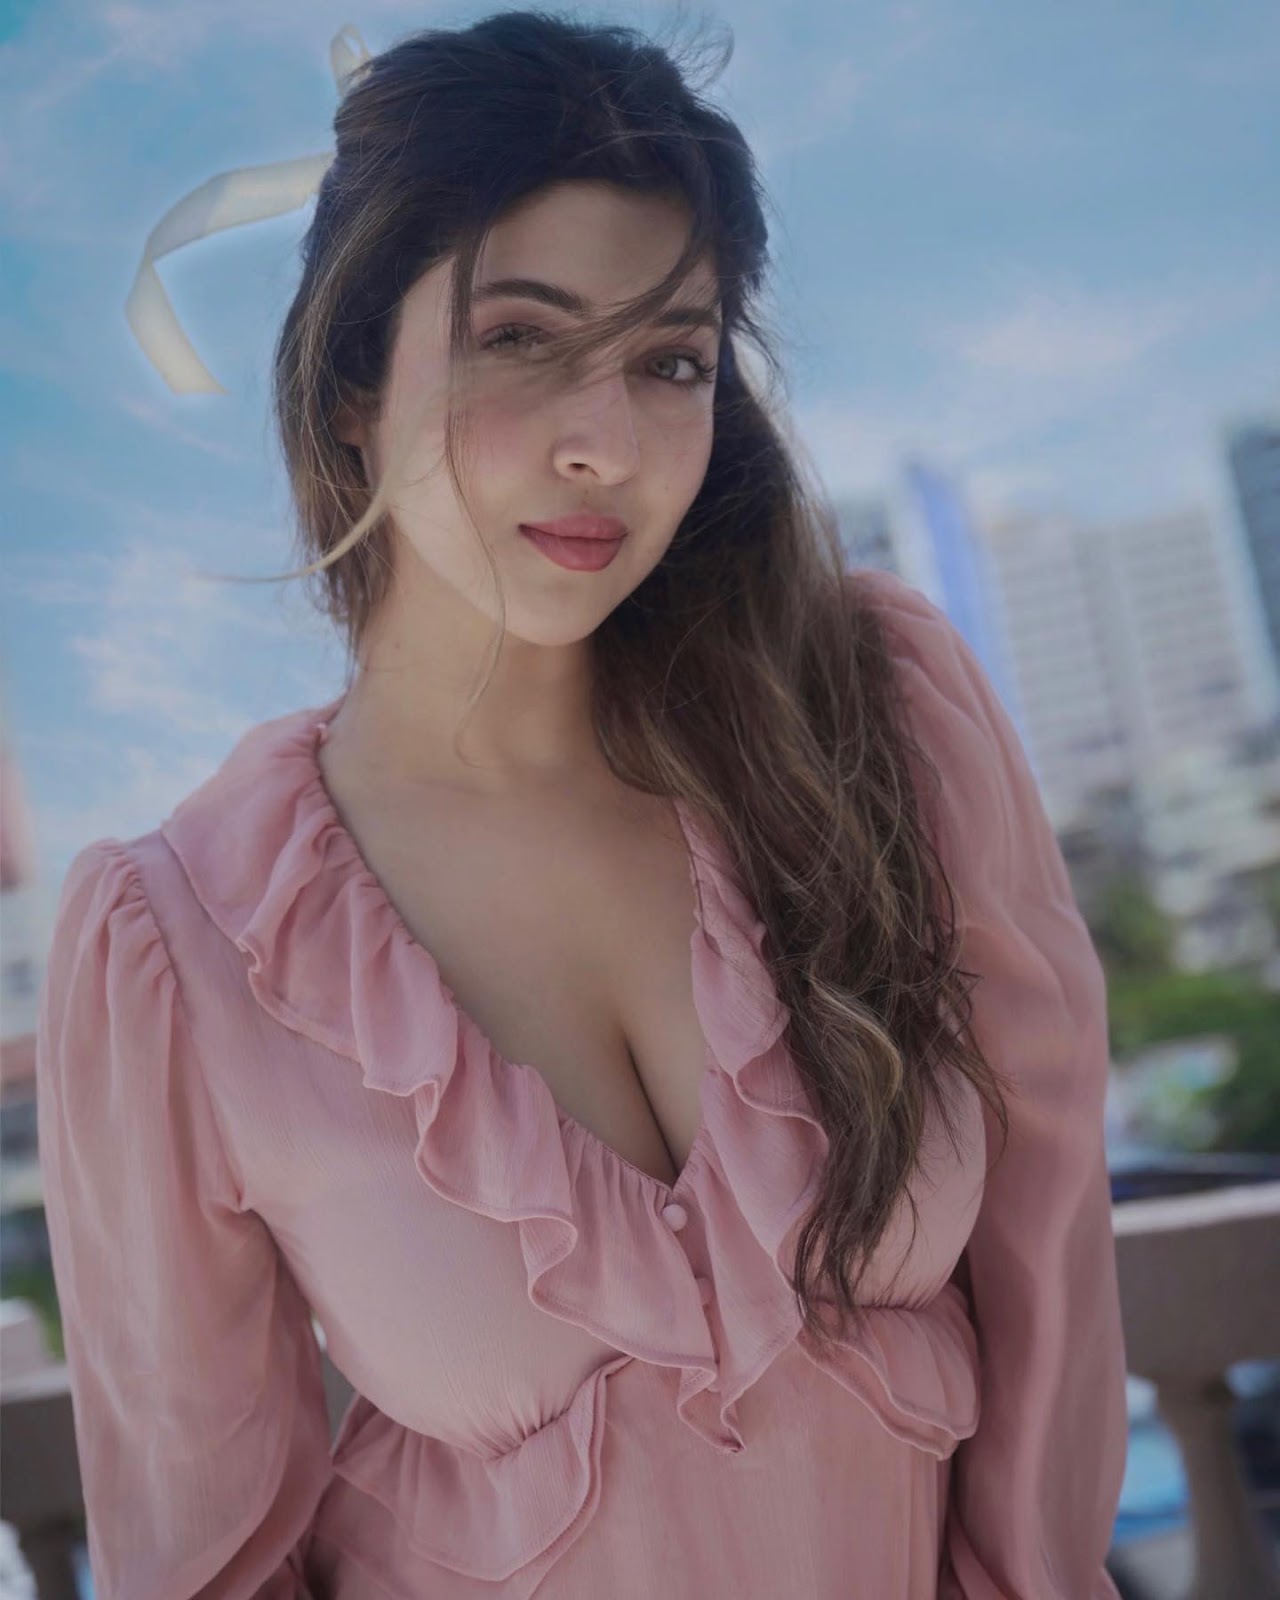 Xxx Sexy Paridhi Sharma - Sonarika Bhadoria looked breathtaking in this cleavage baring pink outfit -  see latest photos.